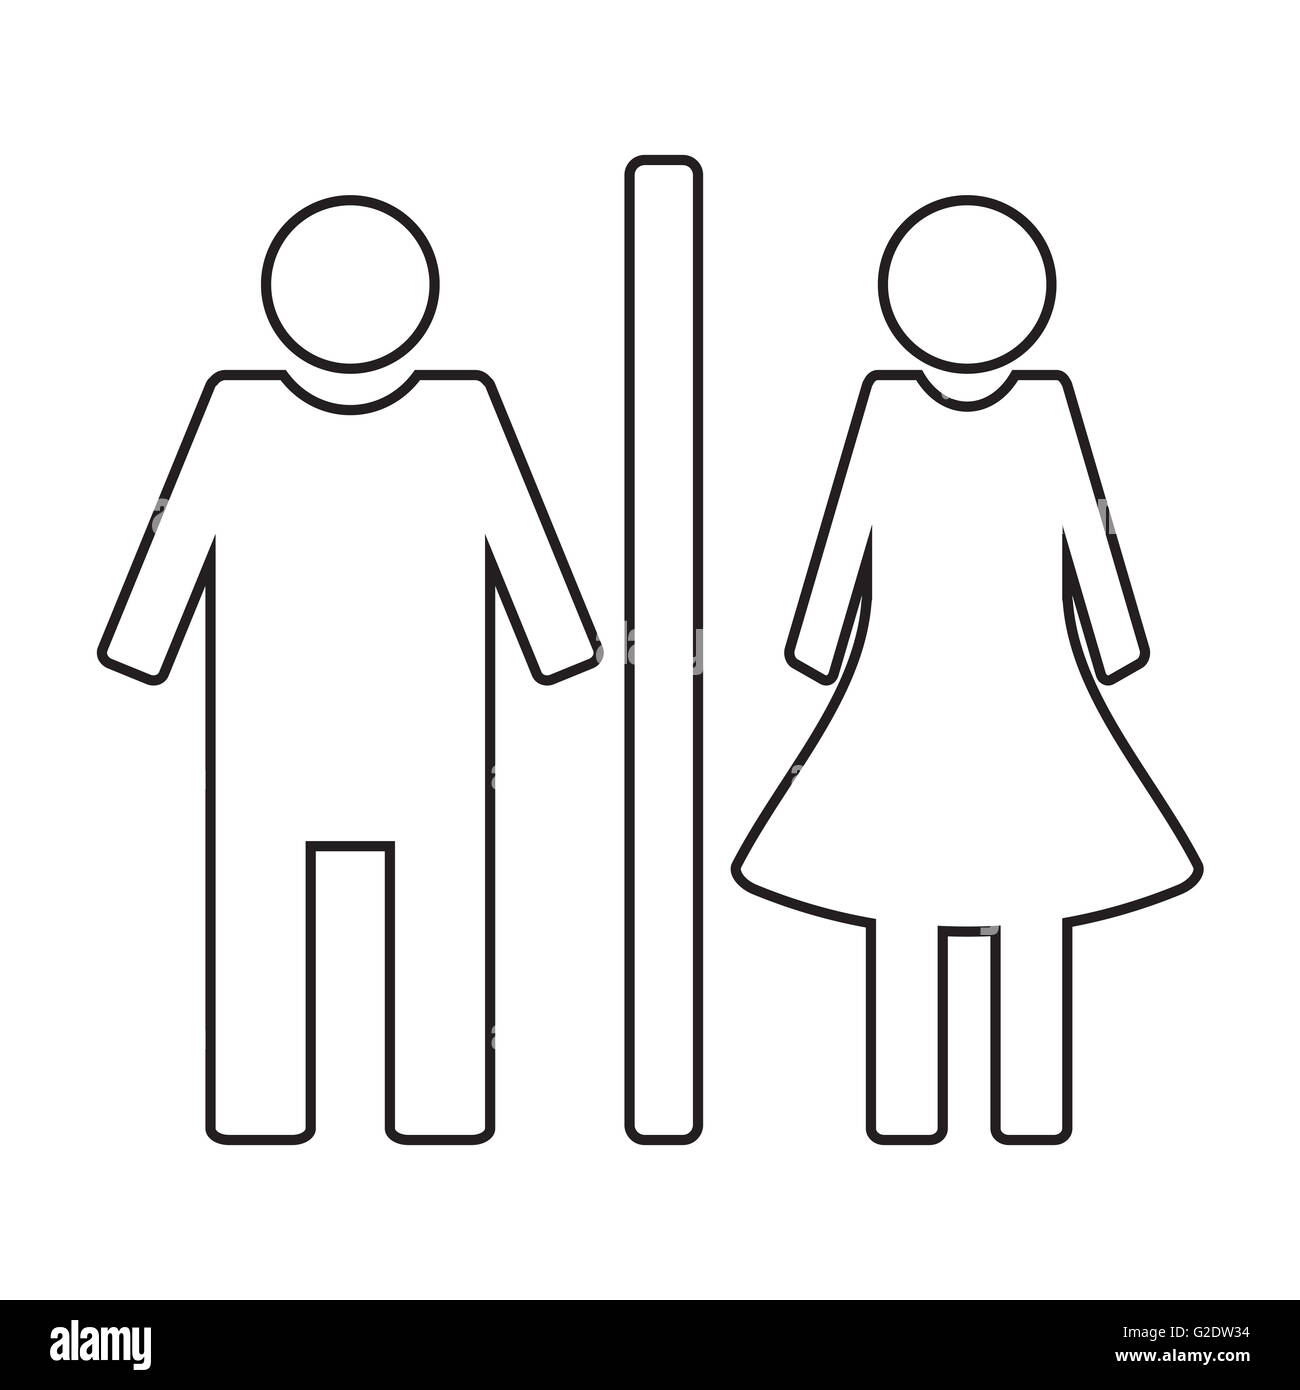 Toilet icon wc linear style. Toilet sign and wc, toilet icon for door. Vector illustration Stock Photo